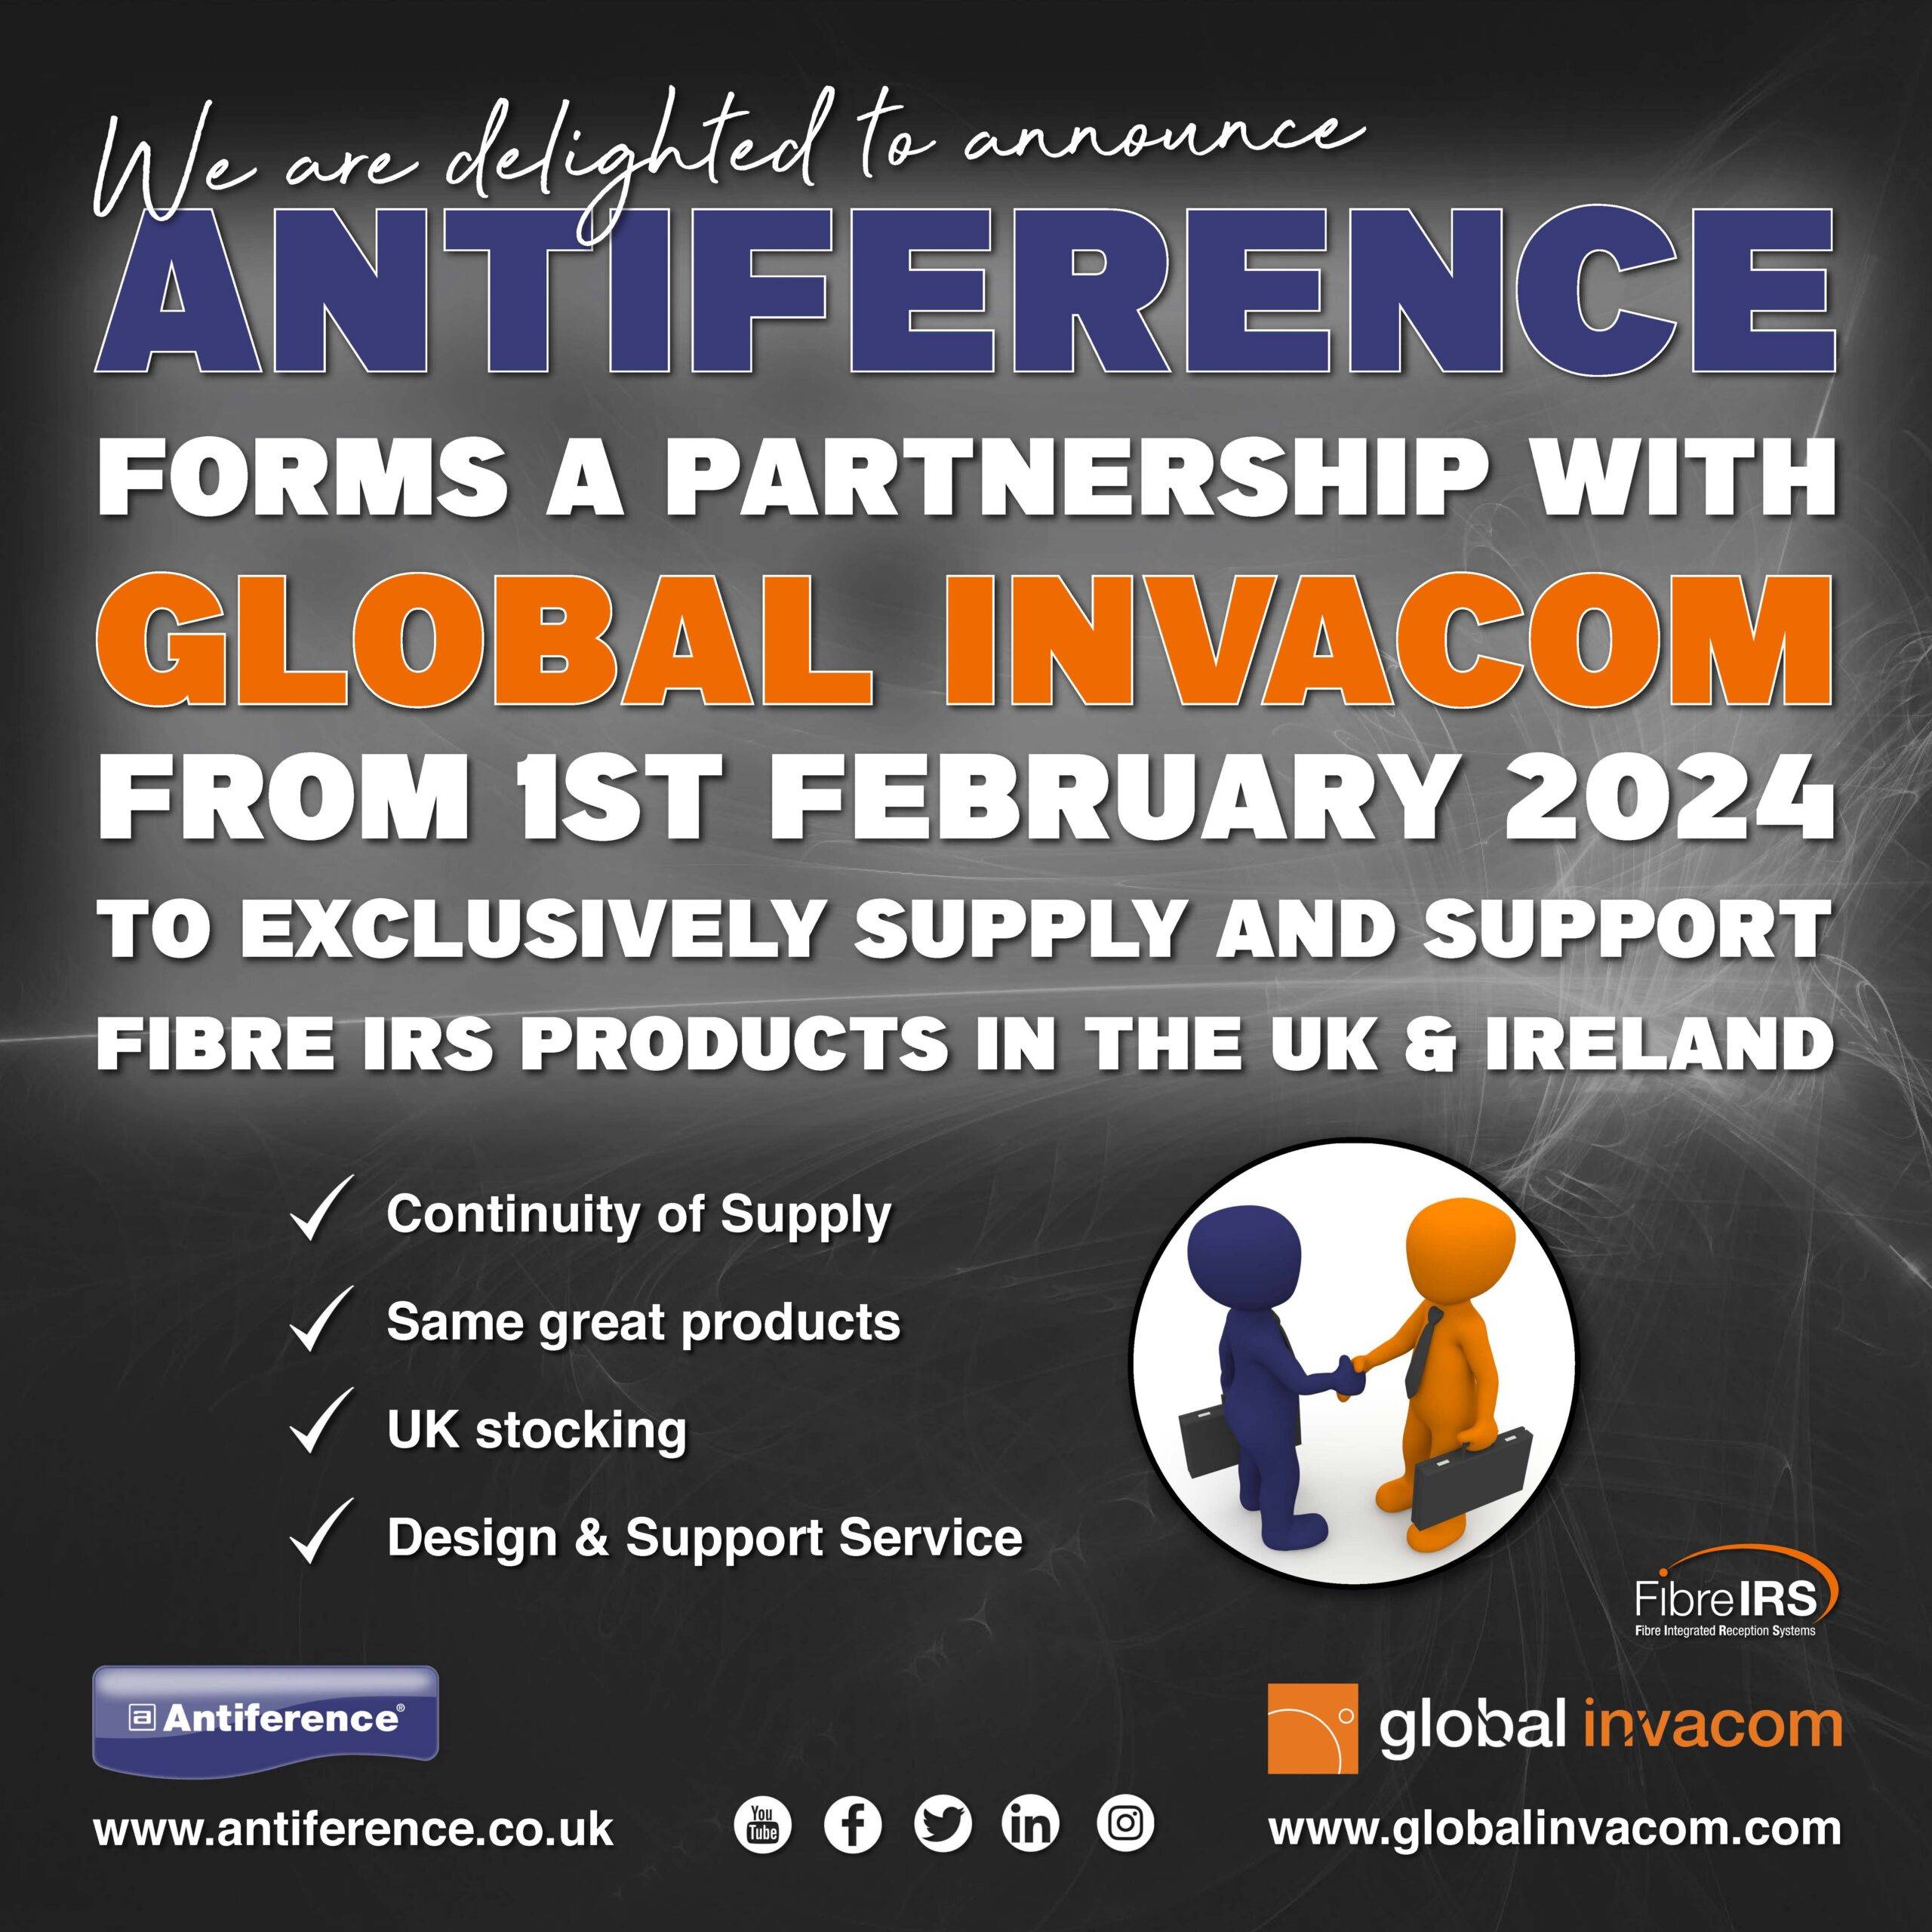 Antiference Forms Partnership with Global Invacom